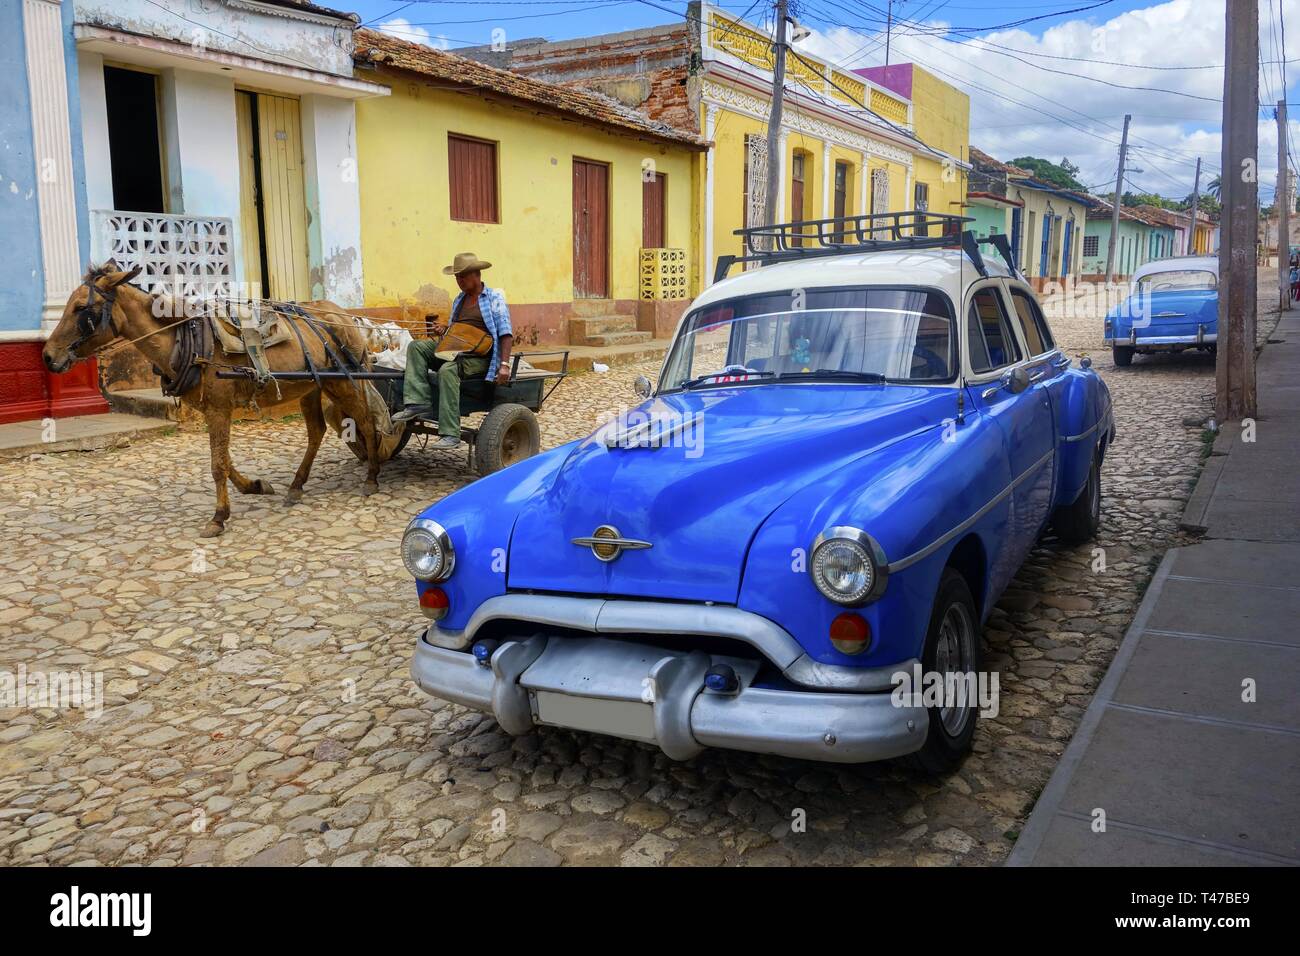 Old Man in Horse Carriage and Classic Cuban Taxi Car on Cobblestone Street showing contrasting Transport Modes and typical City Life in Trinidad, Cuba Stock Photo